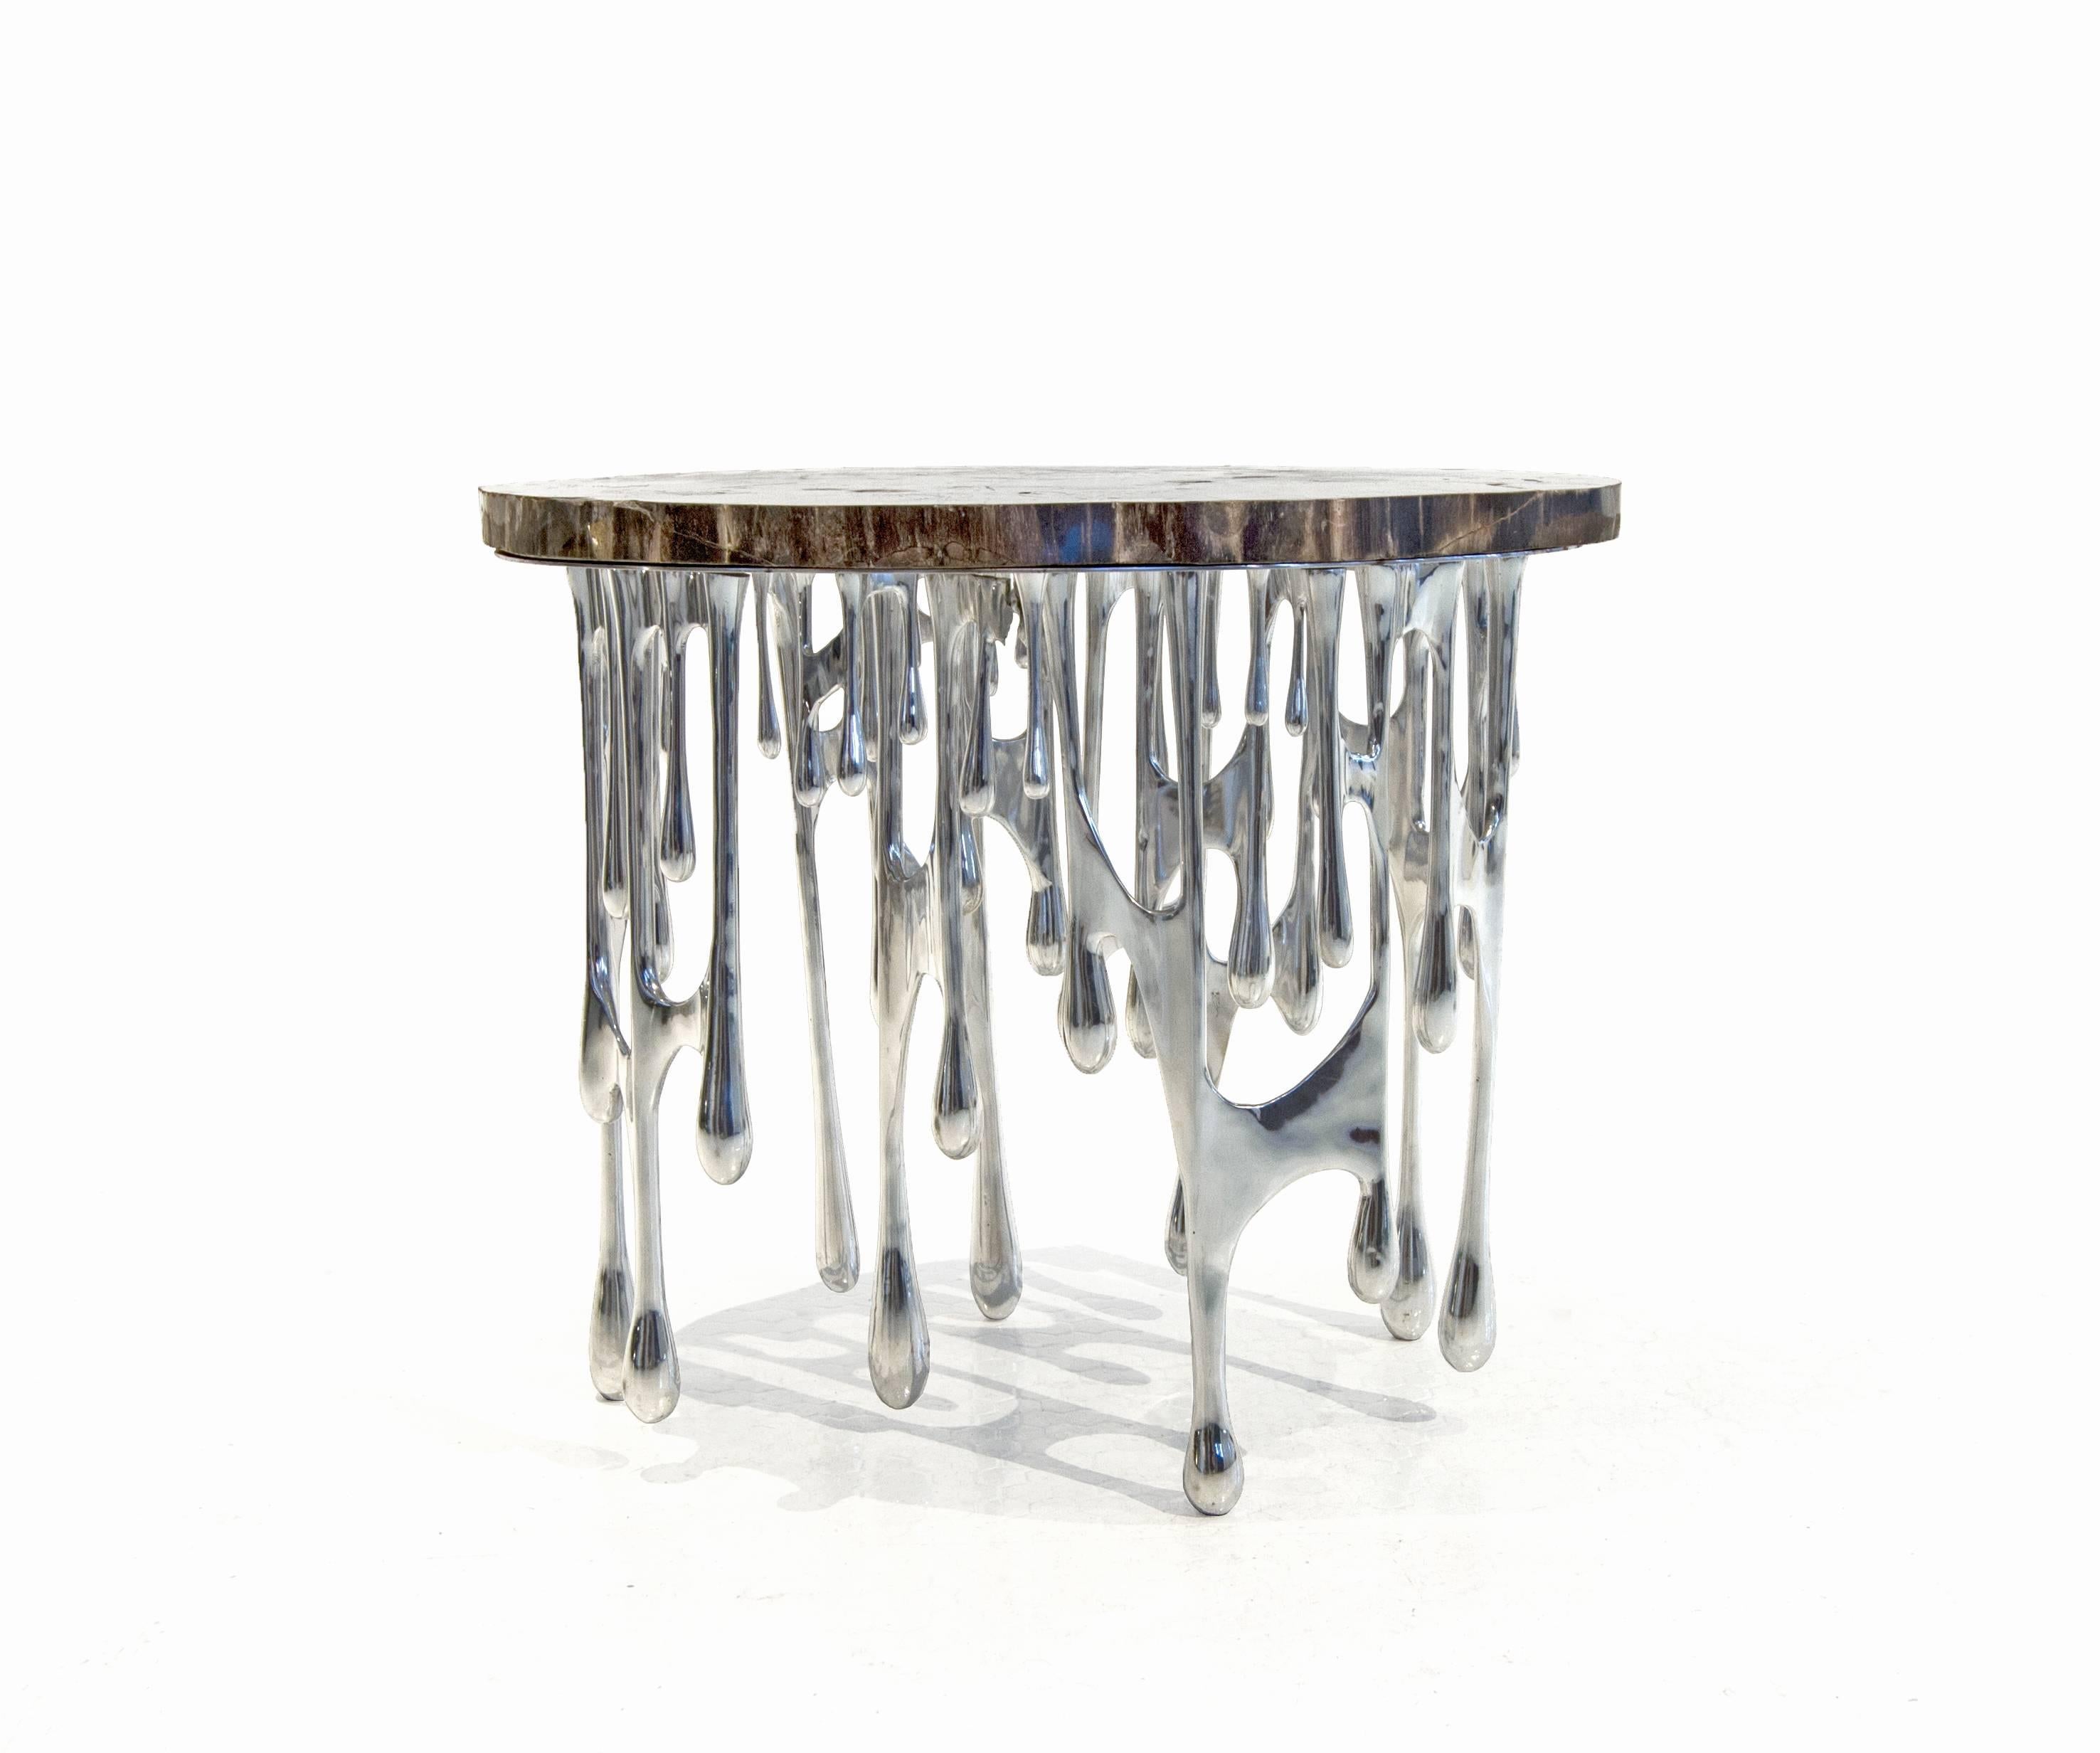 The Dripping Table merges zinc (a product of our techtonic era) and petrified wood (a timeless material).  The melting and dripping zinc symbolizes the emergence of a new world.

The Dripping Table is part of the Morphogen series by John Brevard,